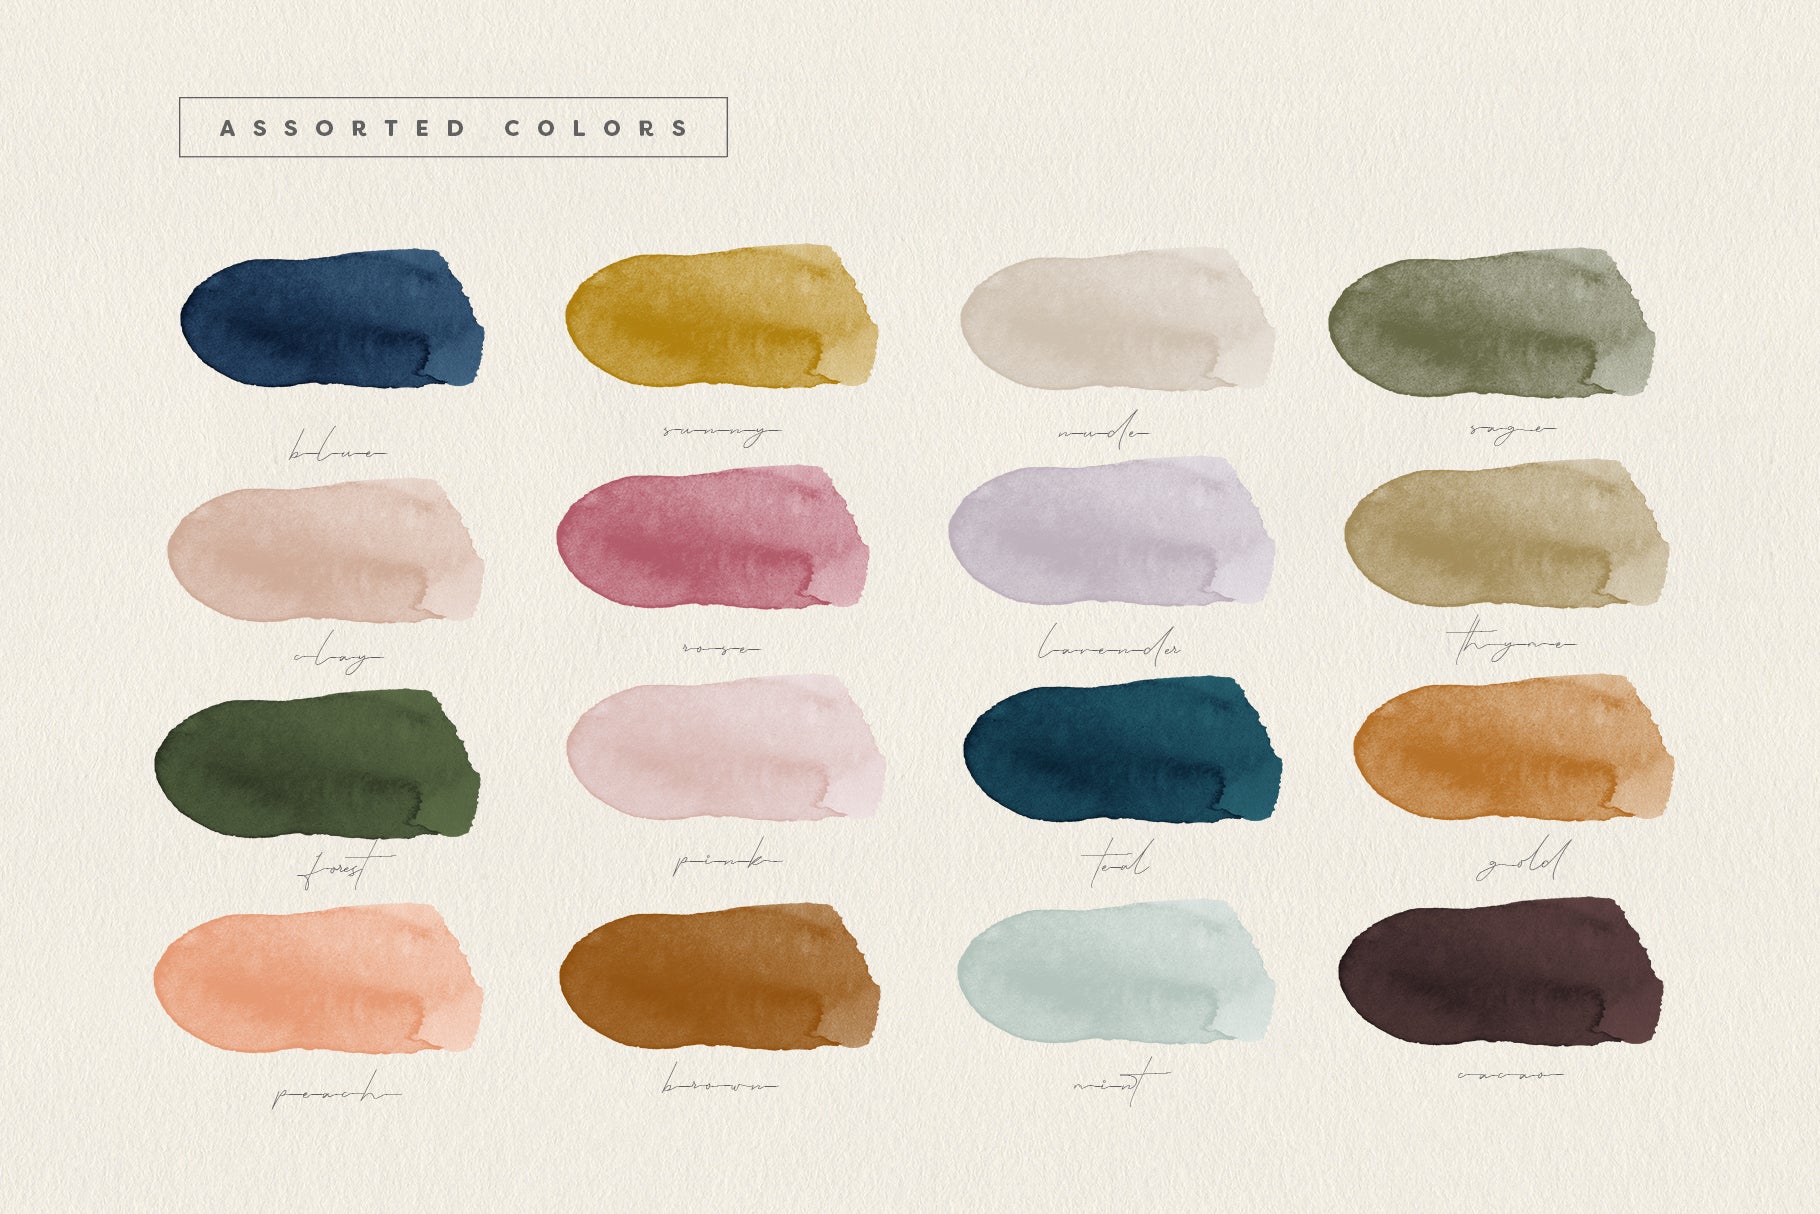 Artist Palette and Paintbrush,artists Palette Watercolor Clipart,instant  DOWNLOAD ,300ppi -  Israel